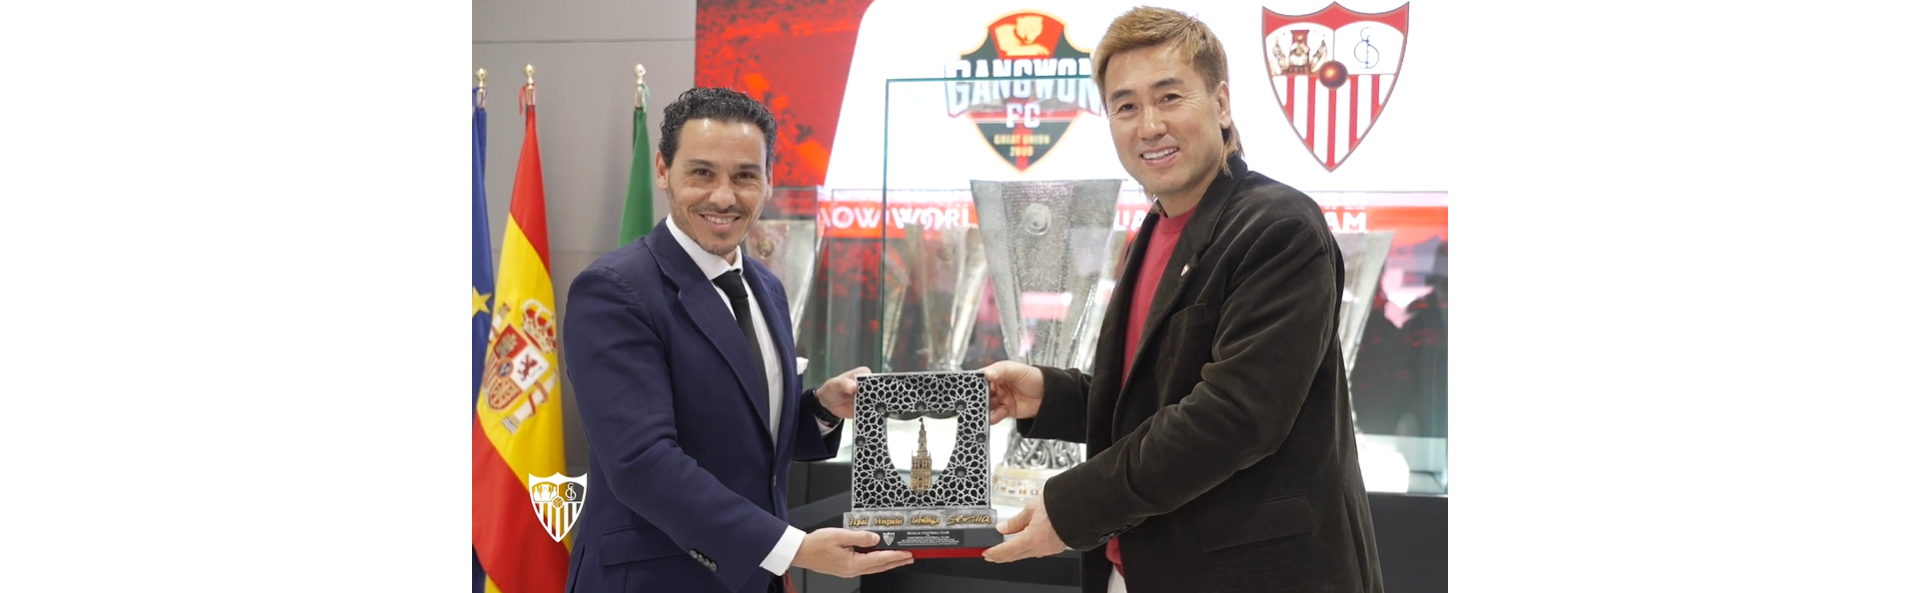 The President and the CEO of Gangwon visit Sevilla FC